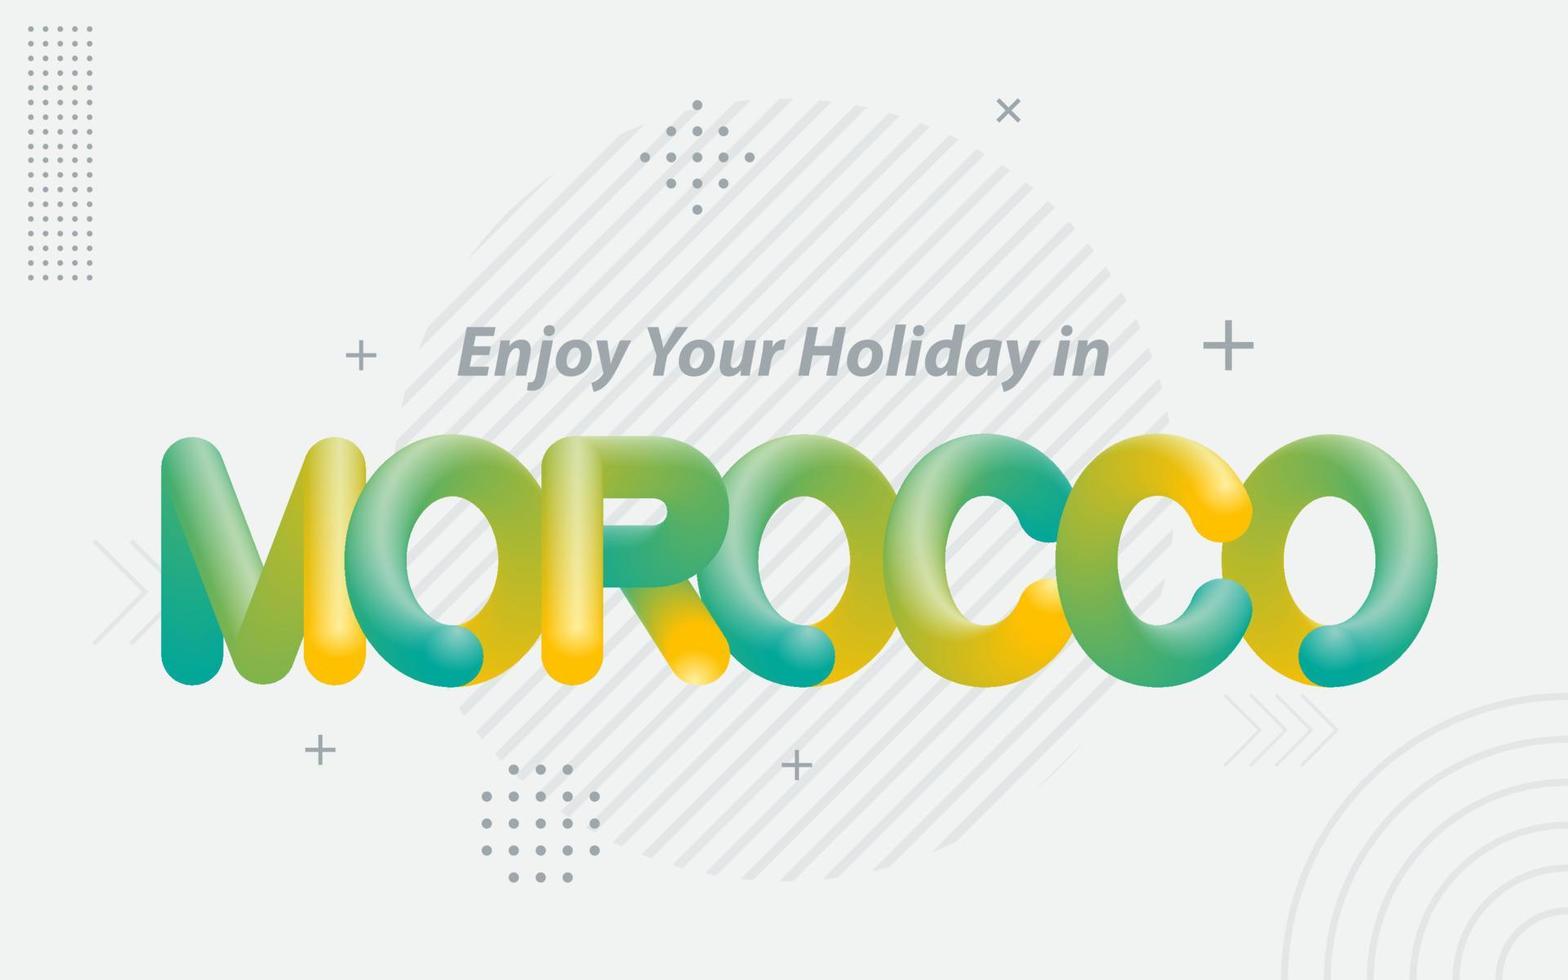 Enjoy your Holiday in Morocco. Creative Typography with 3d Blend effect vector